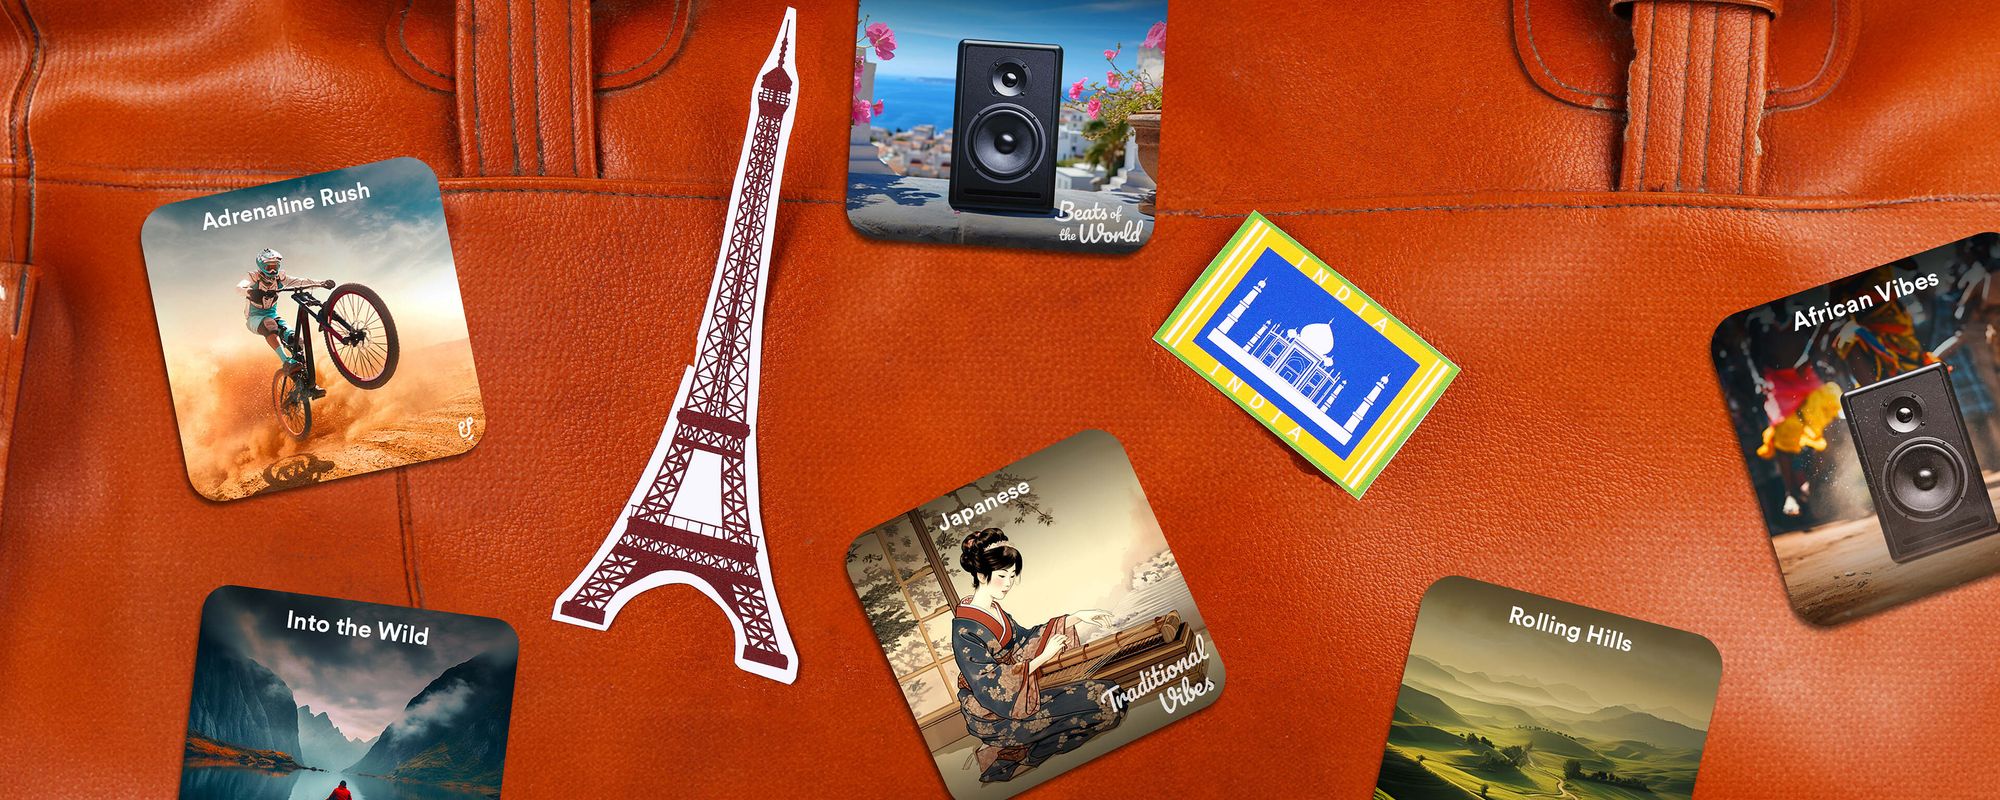 Image of different badges on a piece of luggage, including badges that replicat the imagery used on Uppbeat travel music playlists.